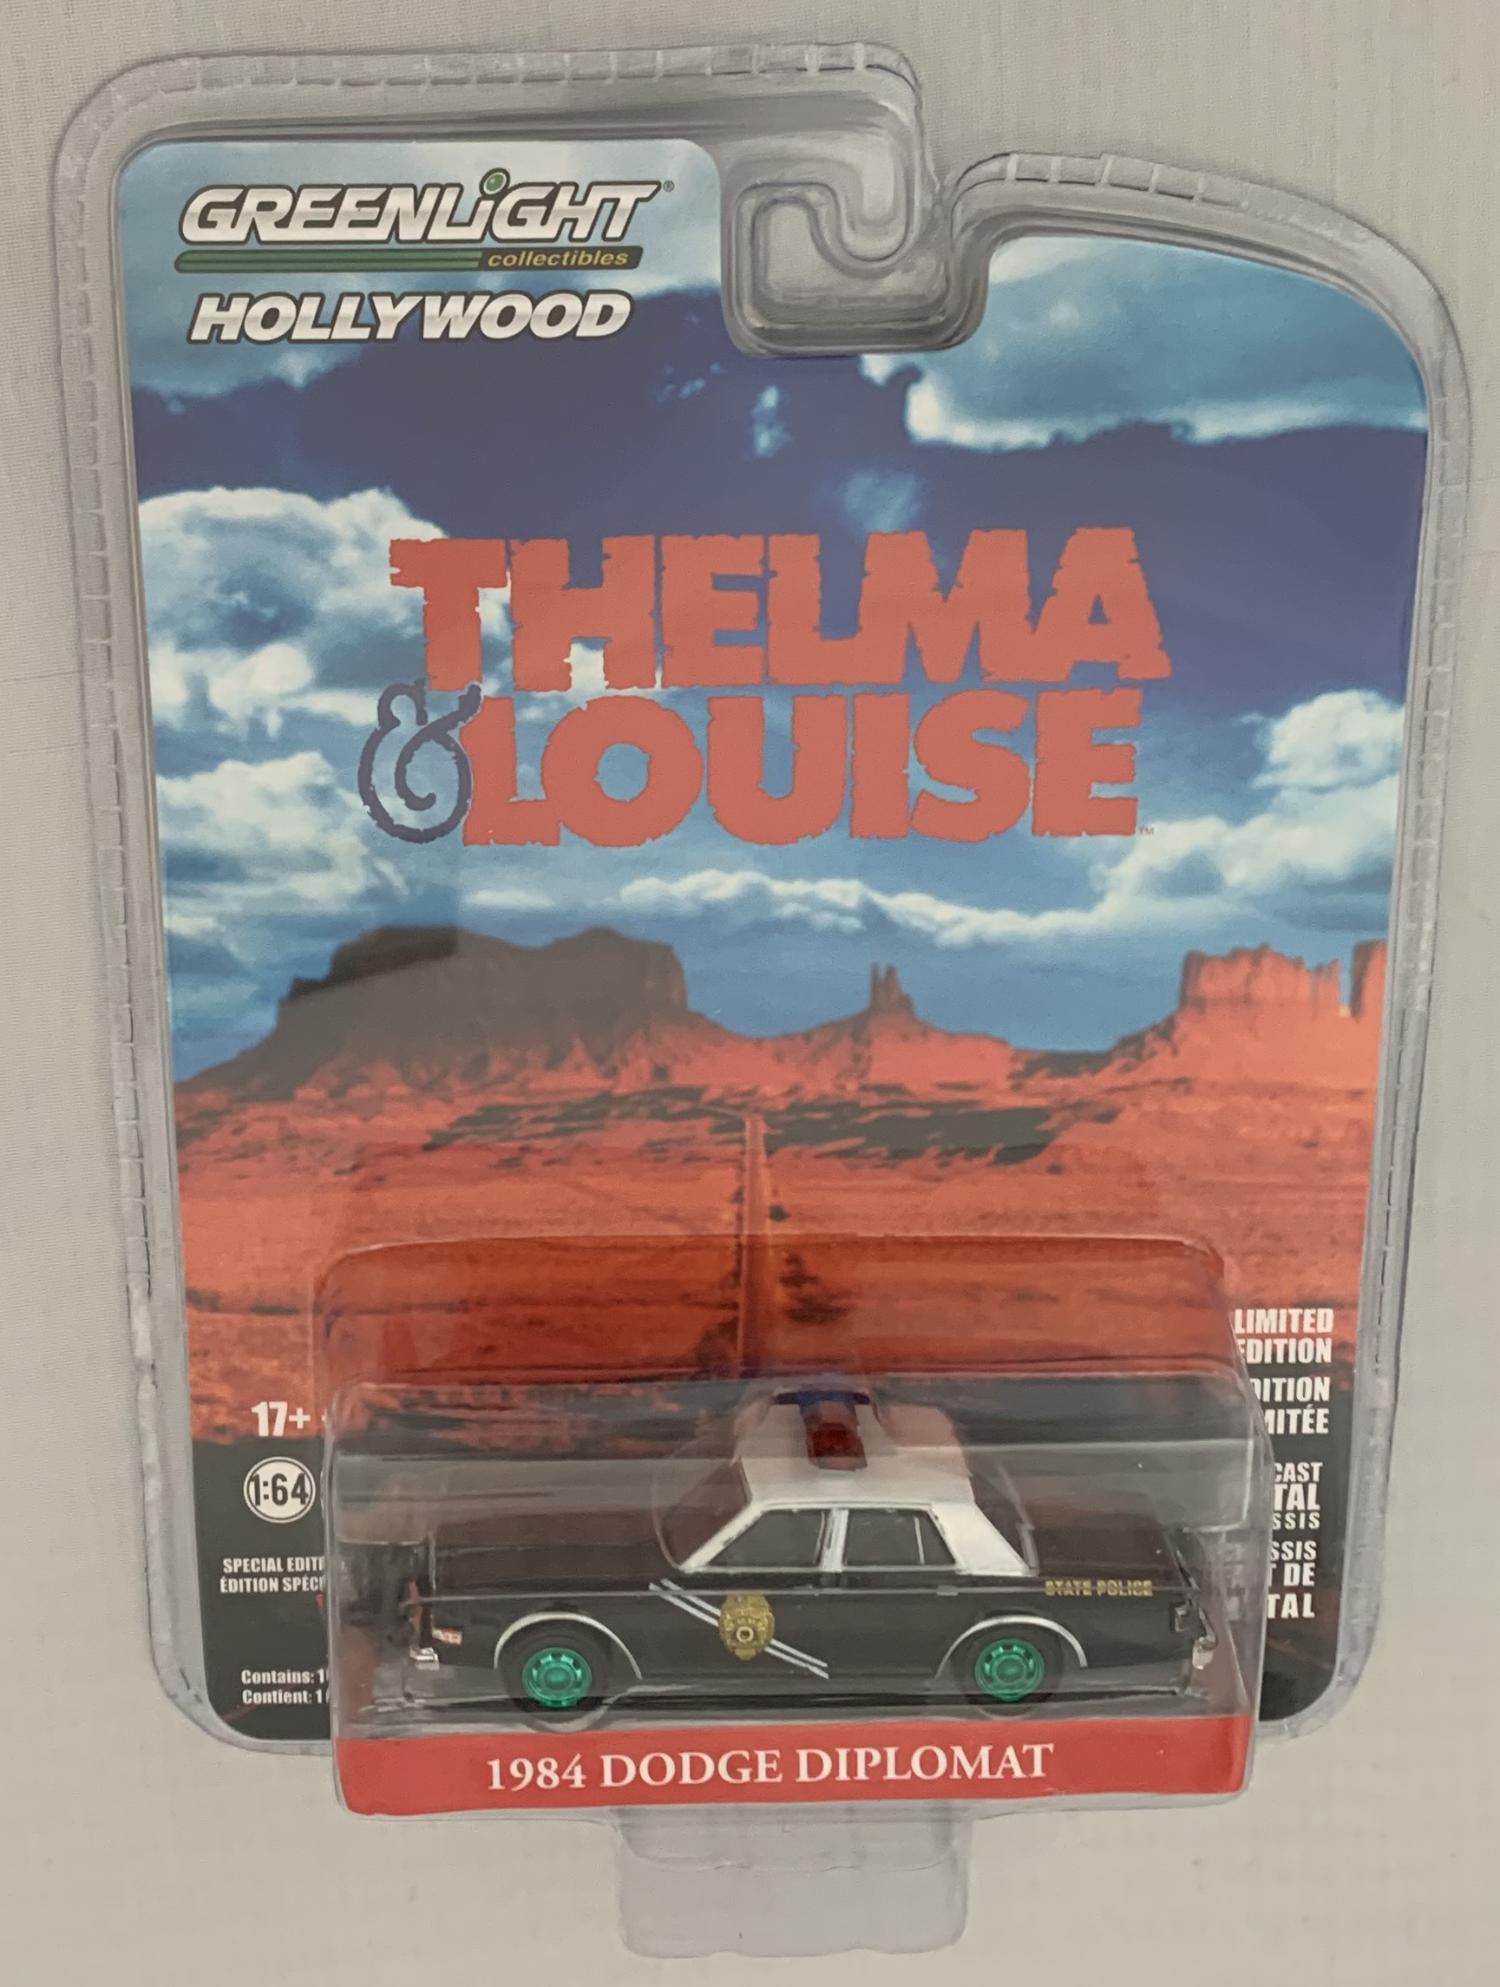 Thelma & Louise 1984 Dodge Diplomat  police car in black 1:64 scale model from Greenlight, Green Machine, limited edition model